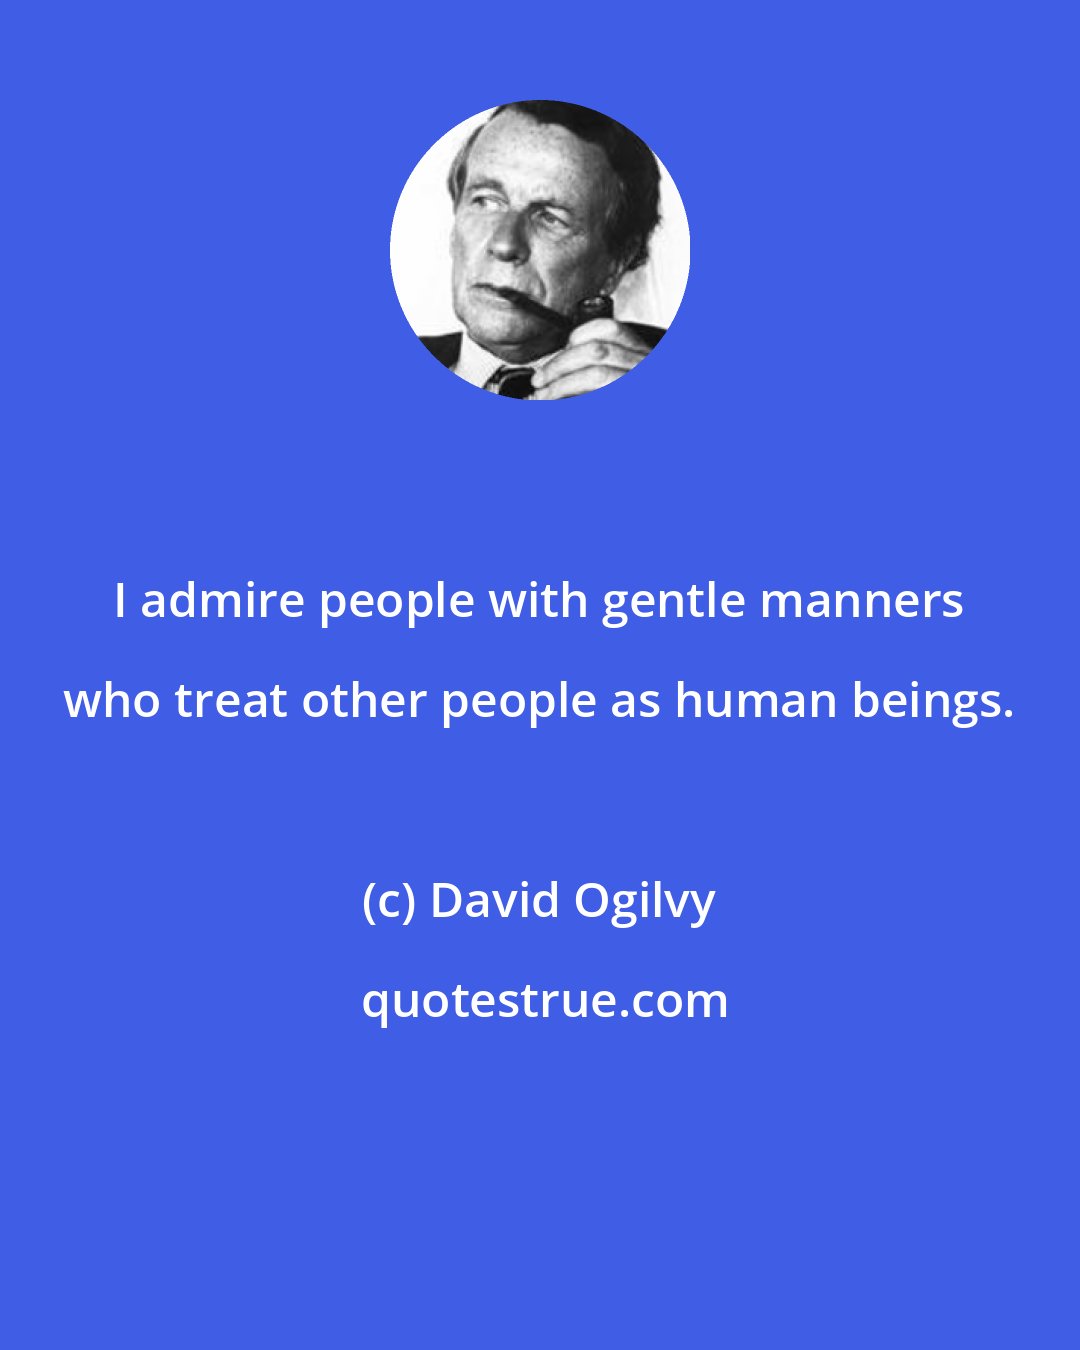 David Ogilvy: I admire people with gentle manners who treat other people as human beings.